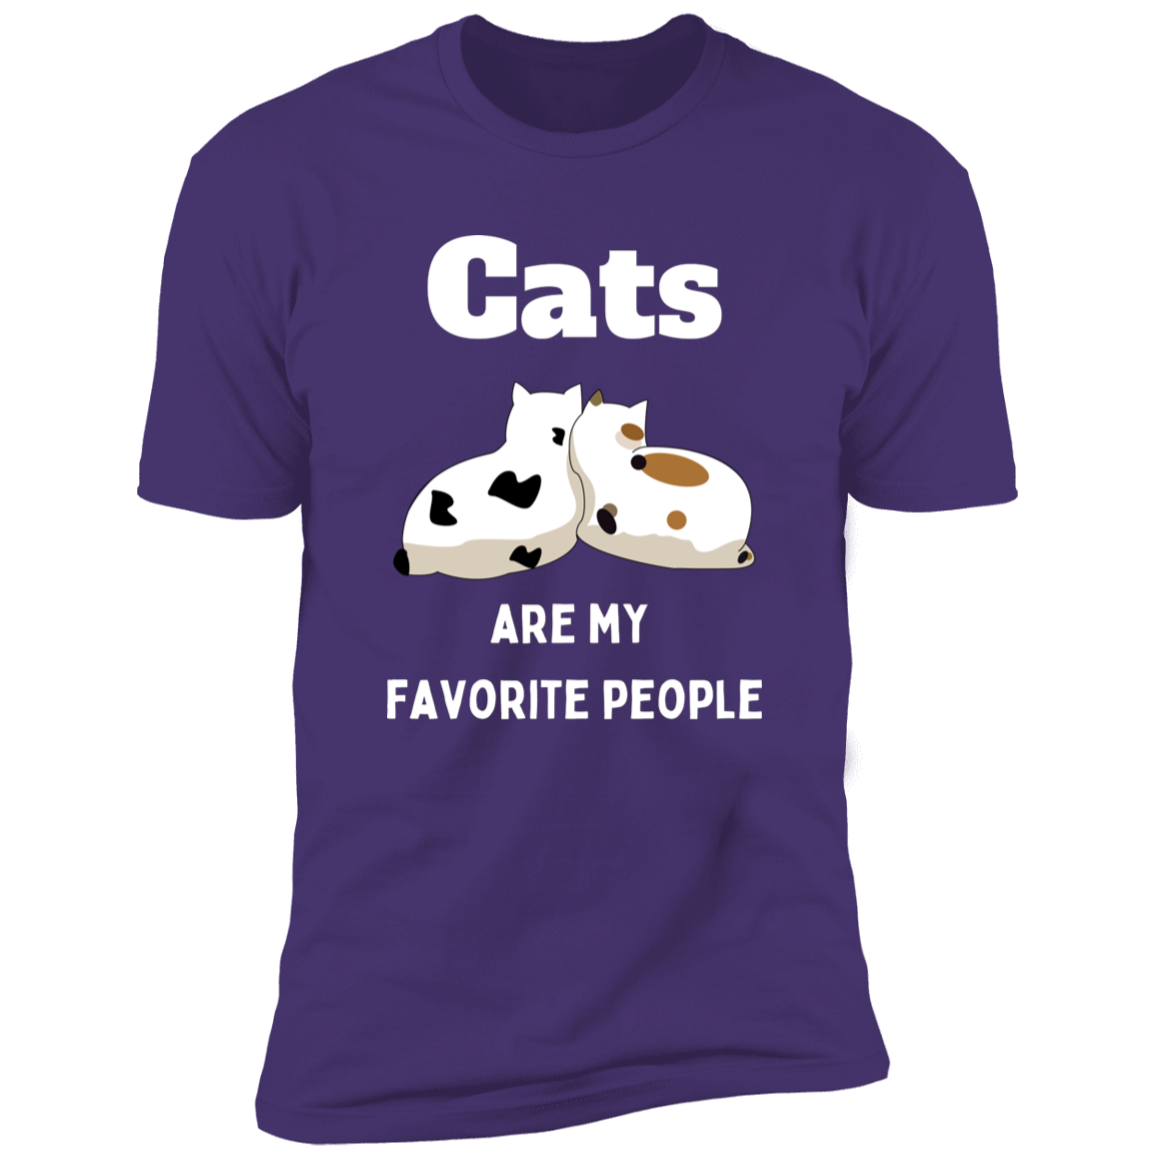 Cats Are My Favorite People T-shirt, Cat Shirt for humans, in purple rush